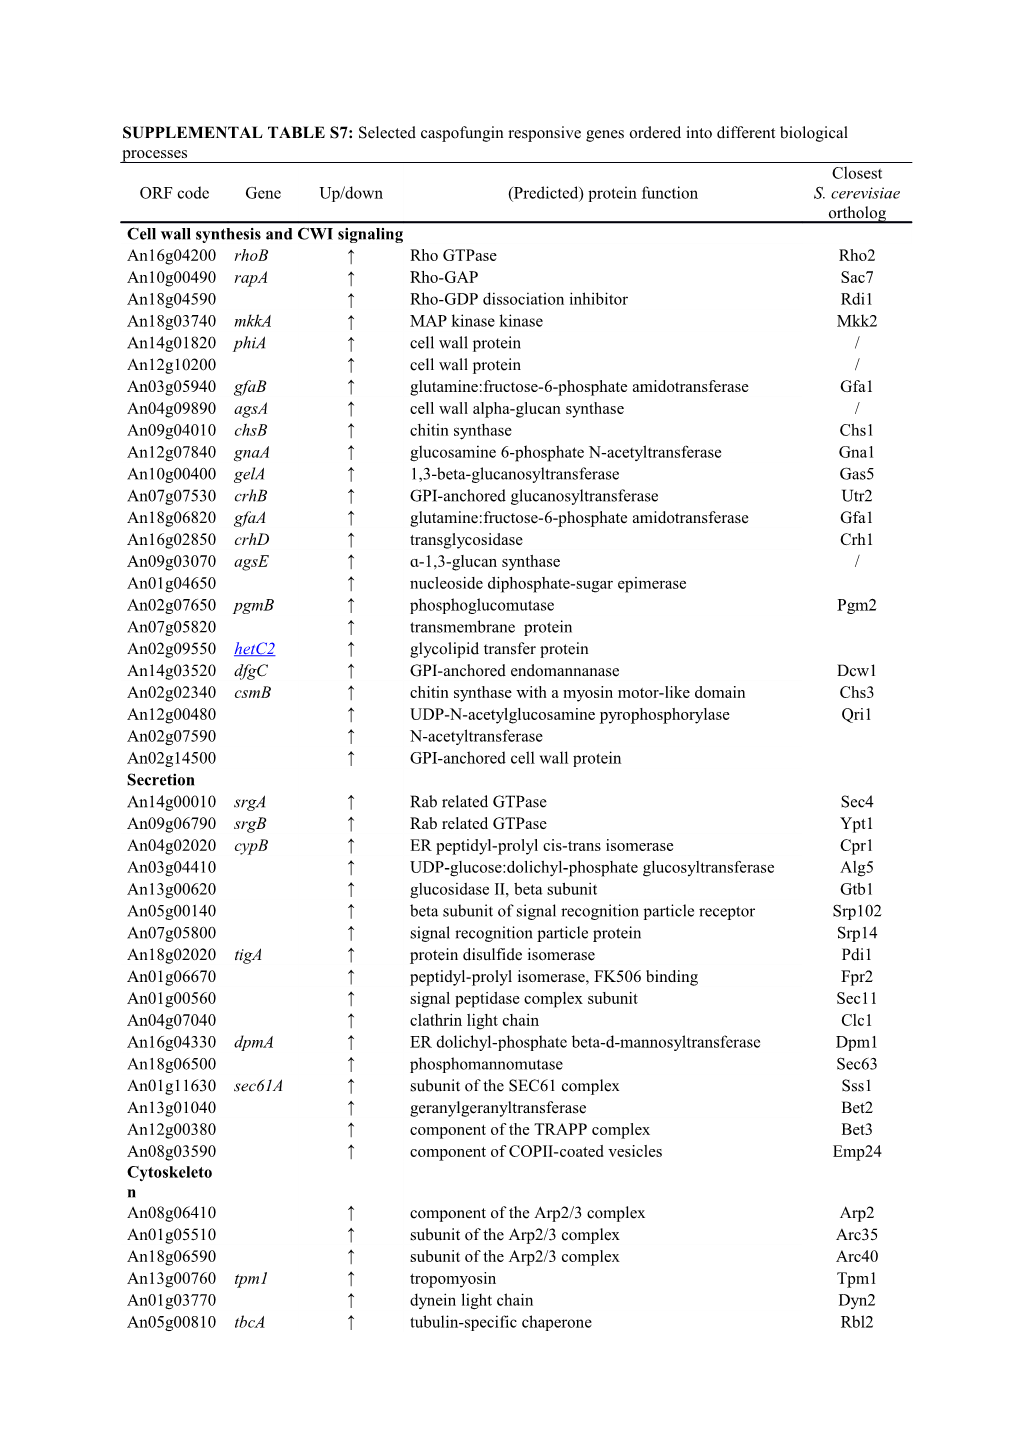 SUPPLEMENTAL TABLE S7: Selected Caspofungin Responsive Genes Ordered Into Different Biological